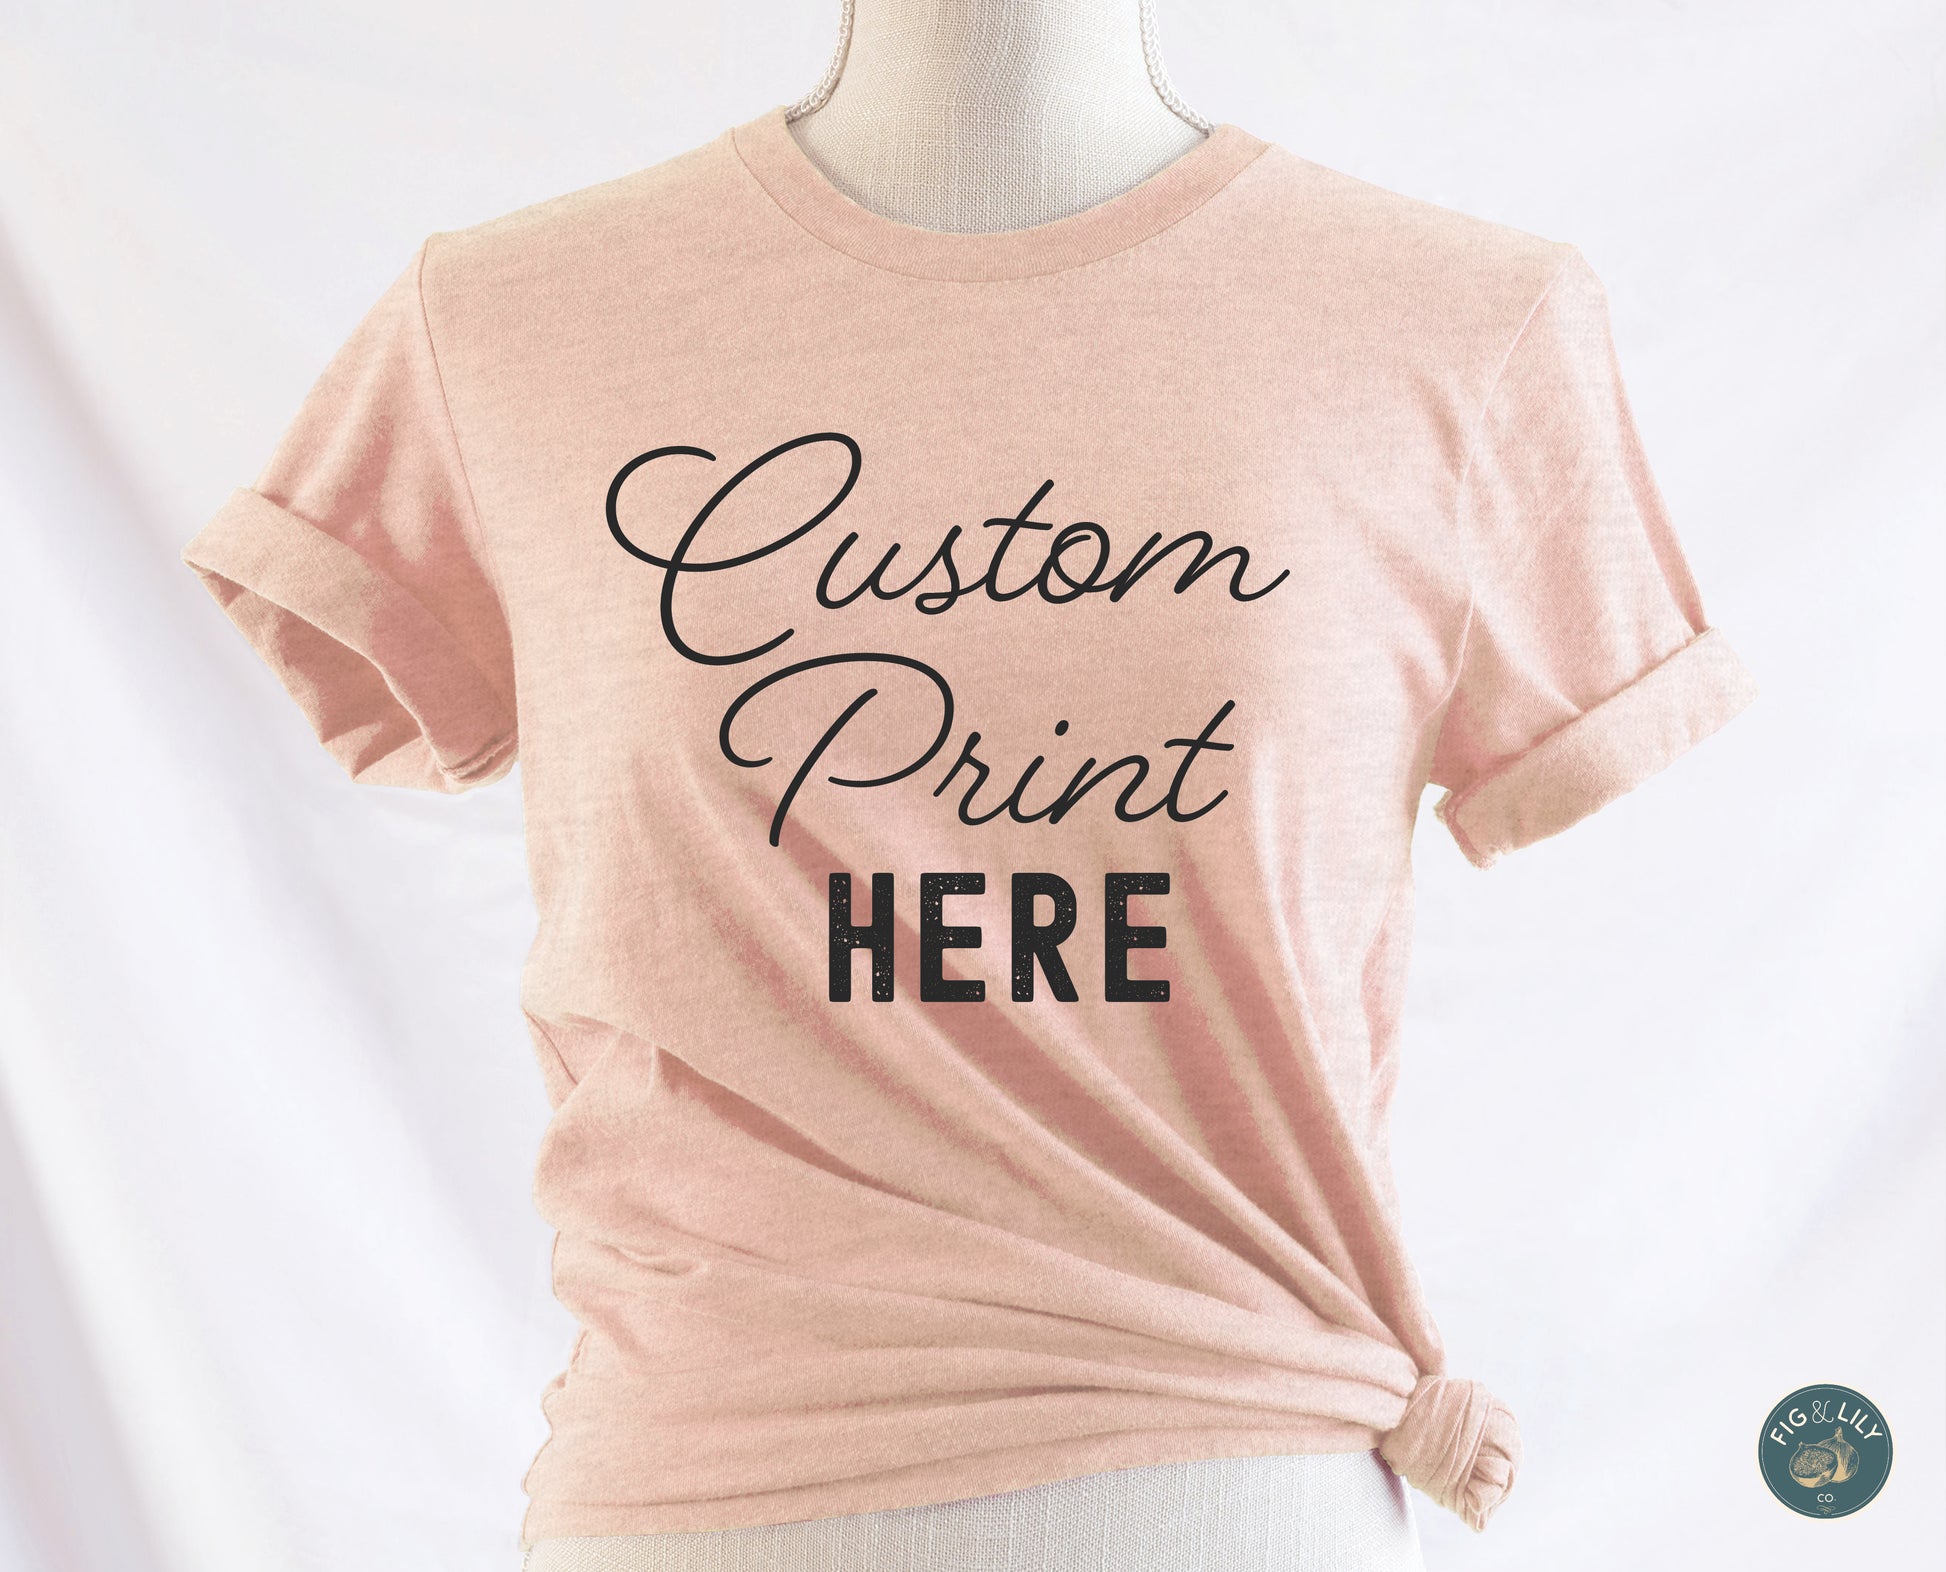 Personalized custom design t-shirt with your approved design printed on soft heather prism peach unisex tshirt 